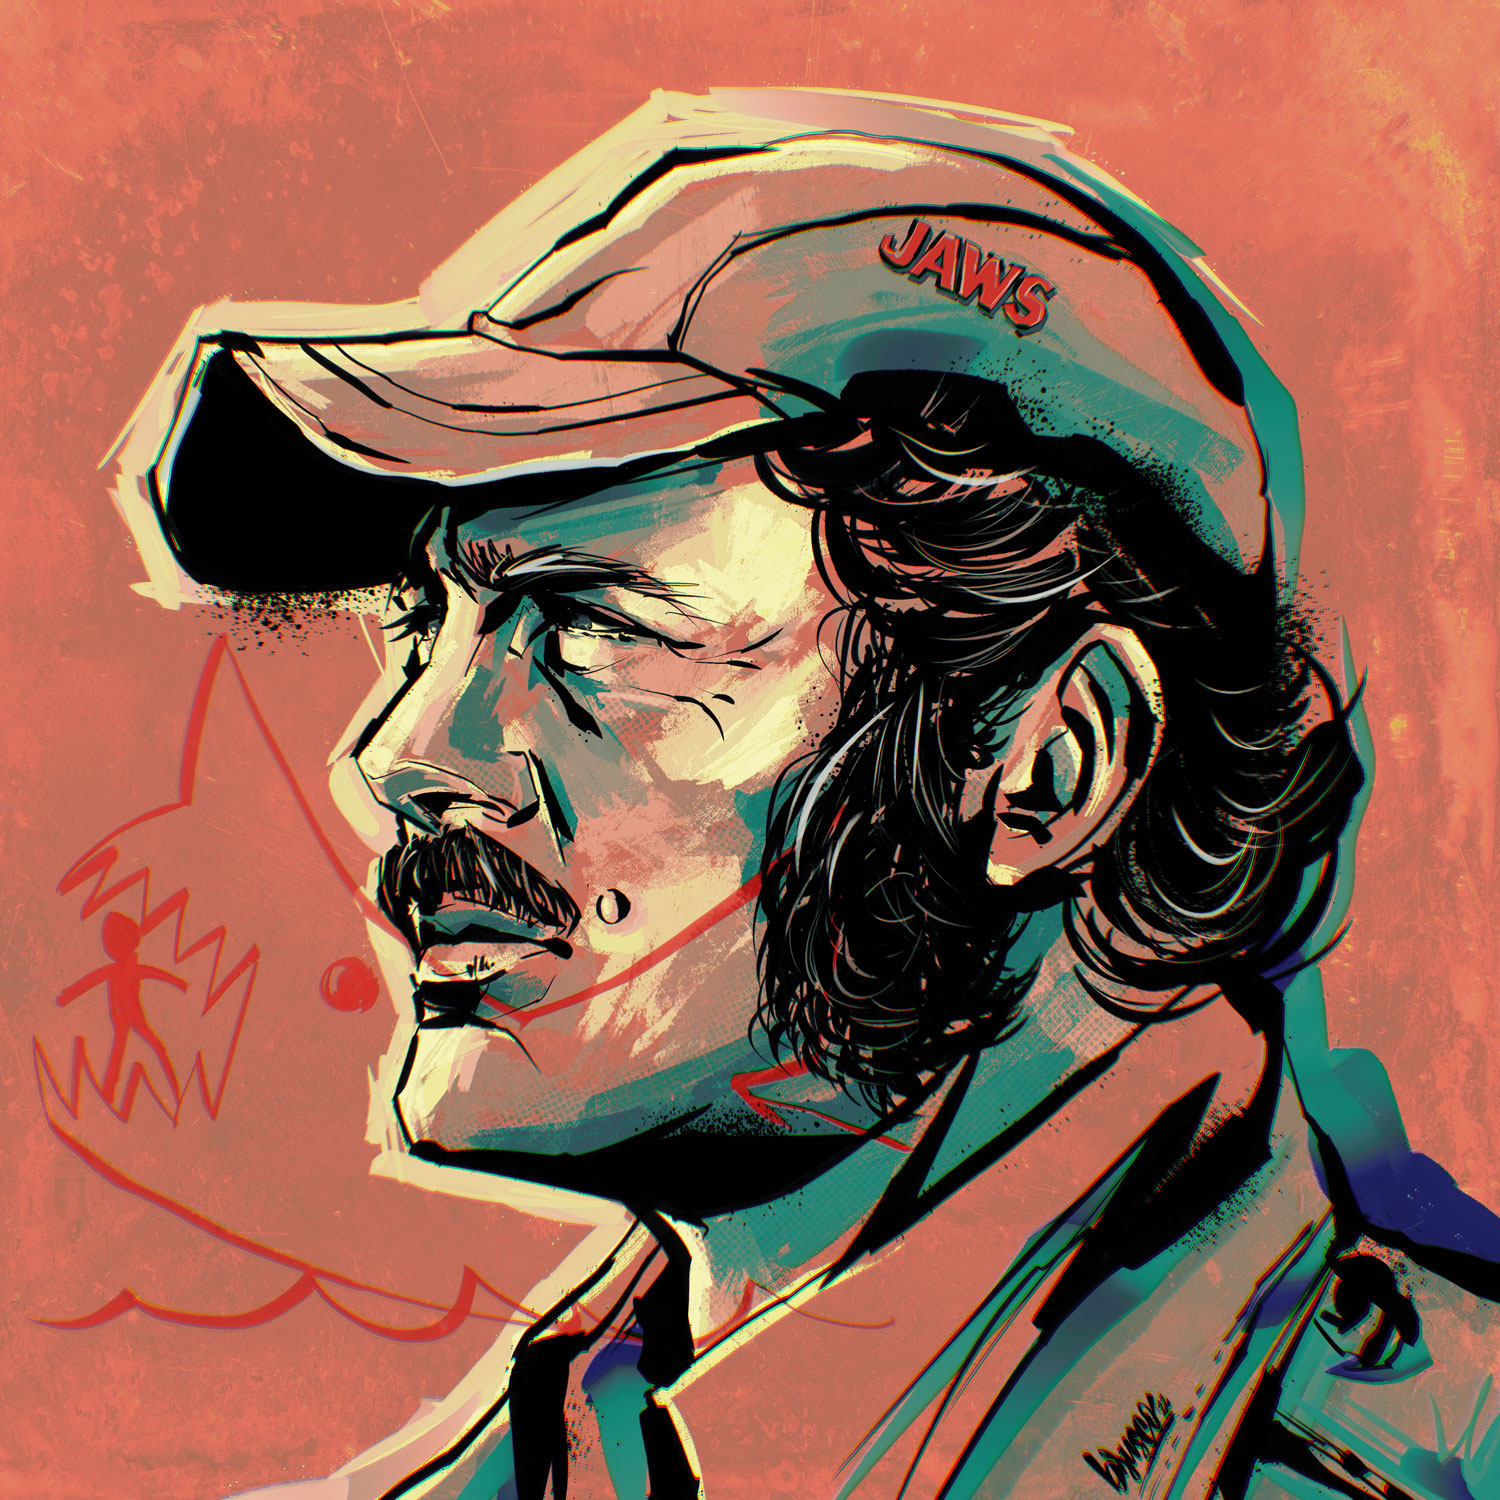 Quint JAWS byBrusco